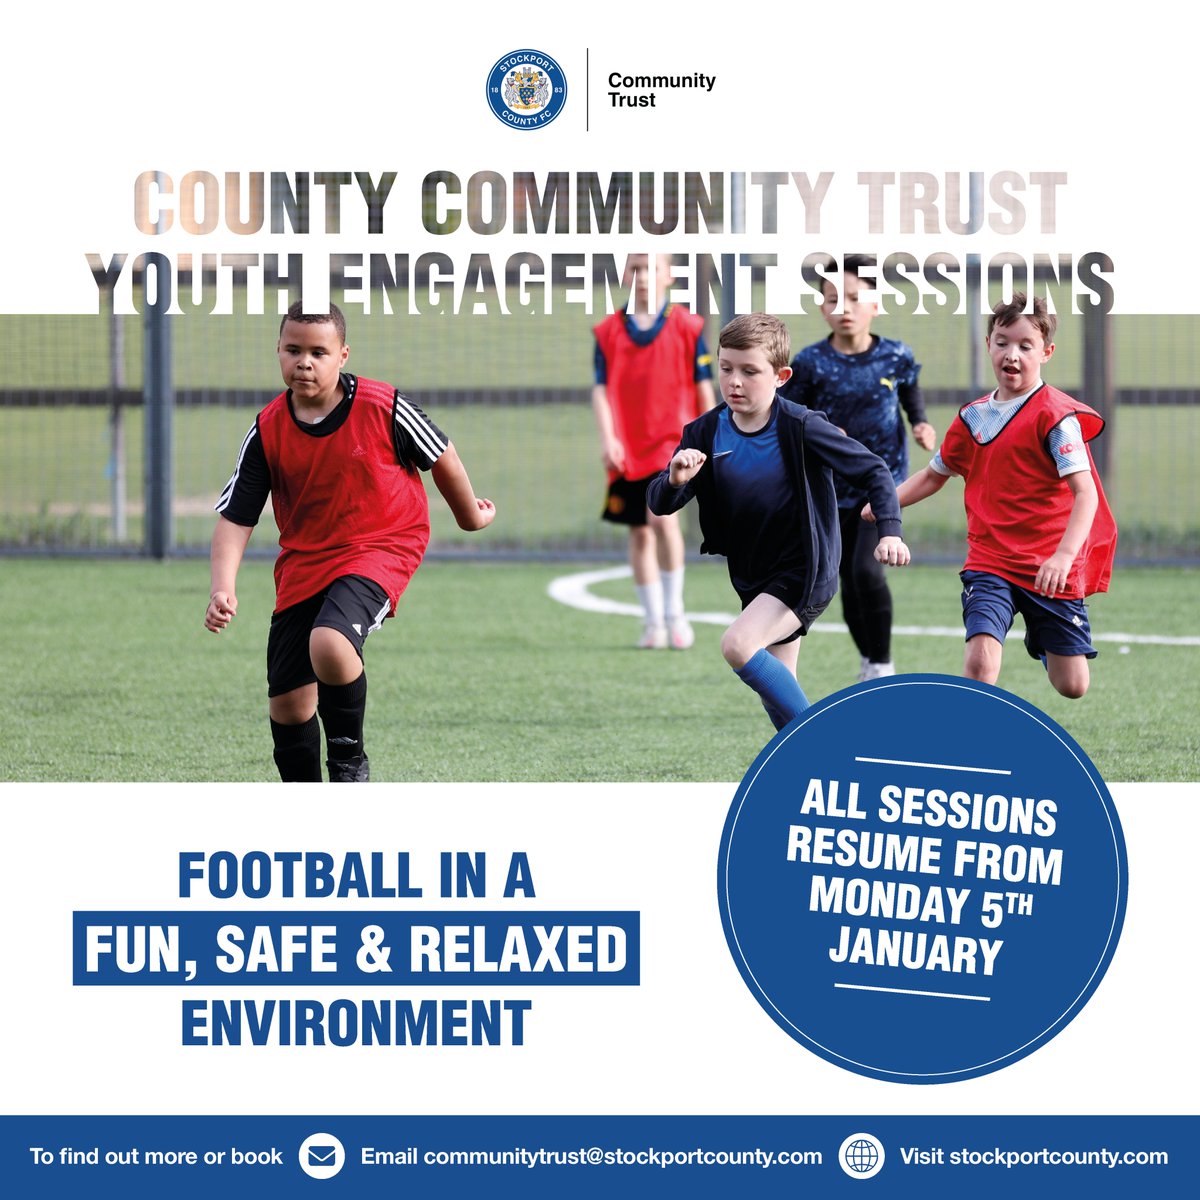 We are excited to start welcoming our @StockportCounty @SCFCCommunity participants back to our free Youth Engagement Sessions across Stockport, Tameside & East Cheshire from Monday for a great 2023! Sessions are open to boys and girls aged 10-16. #CountyCommunity